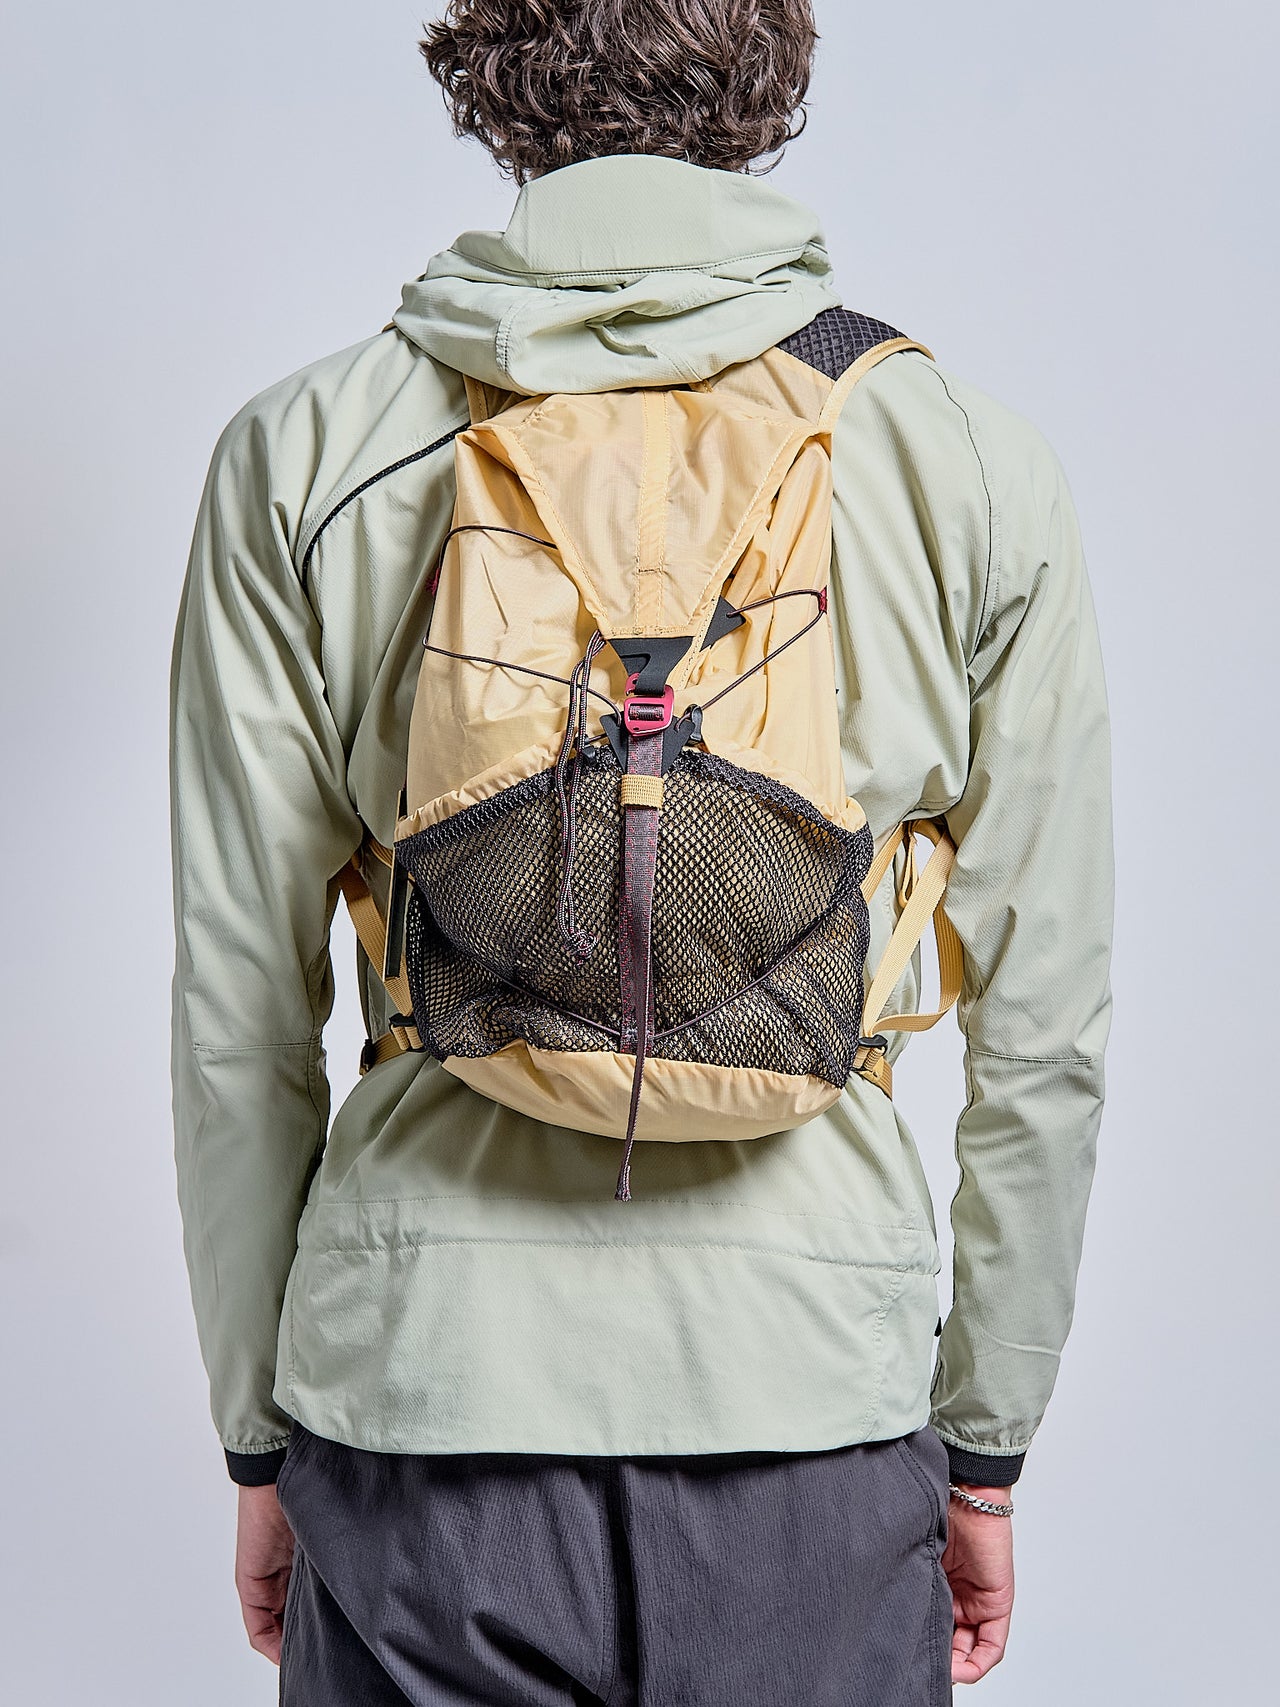 Tjalve 2.0 Backpack 10L in Chaya Sand